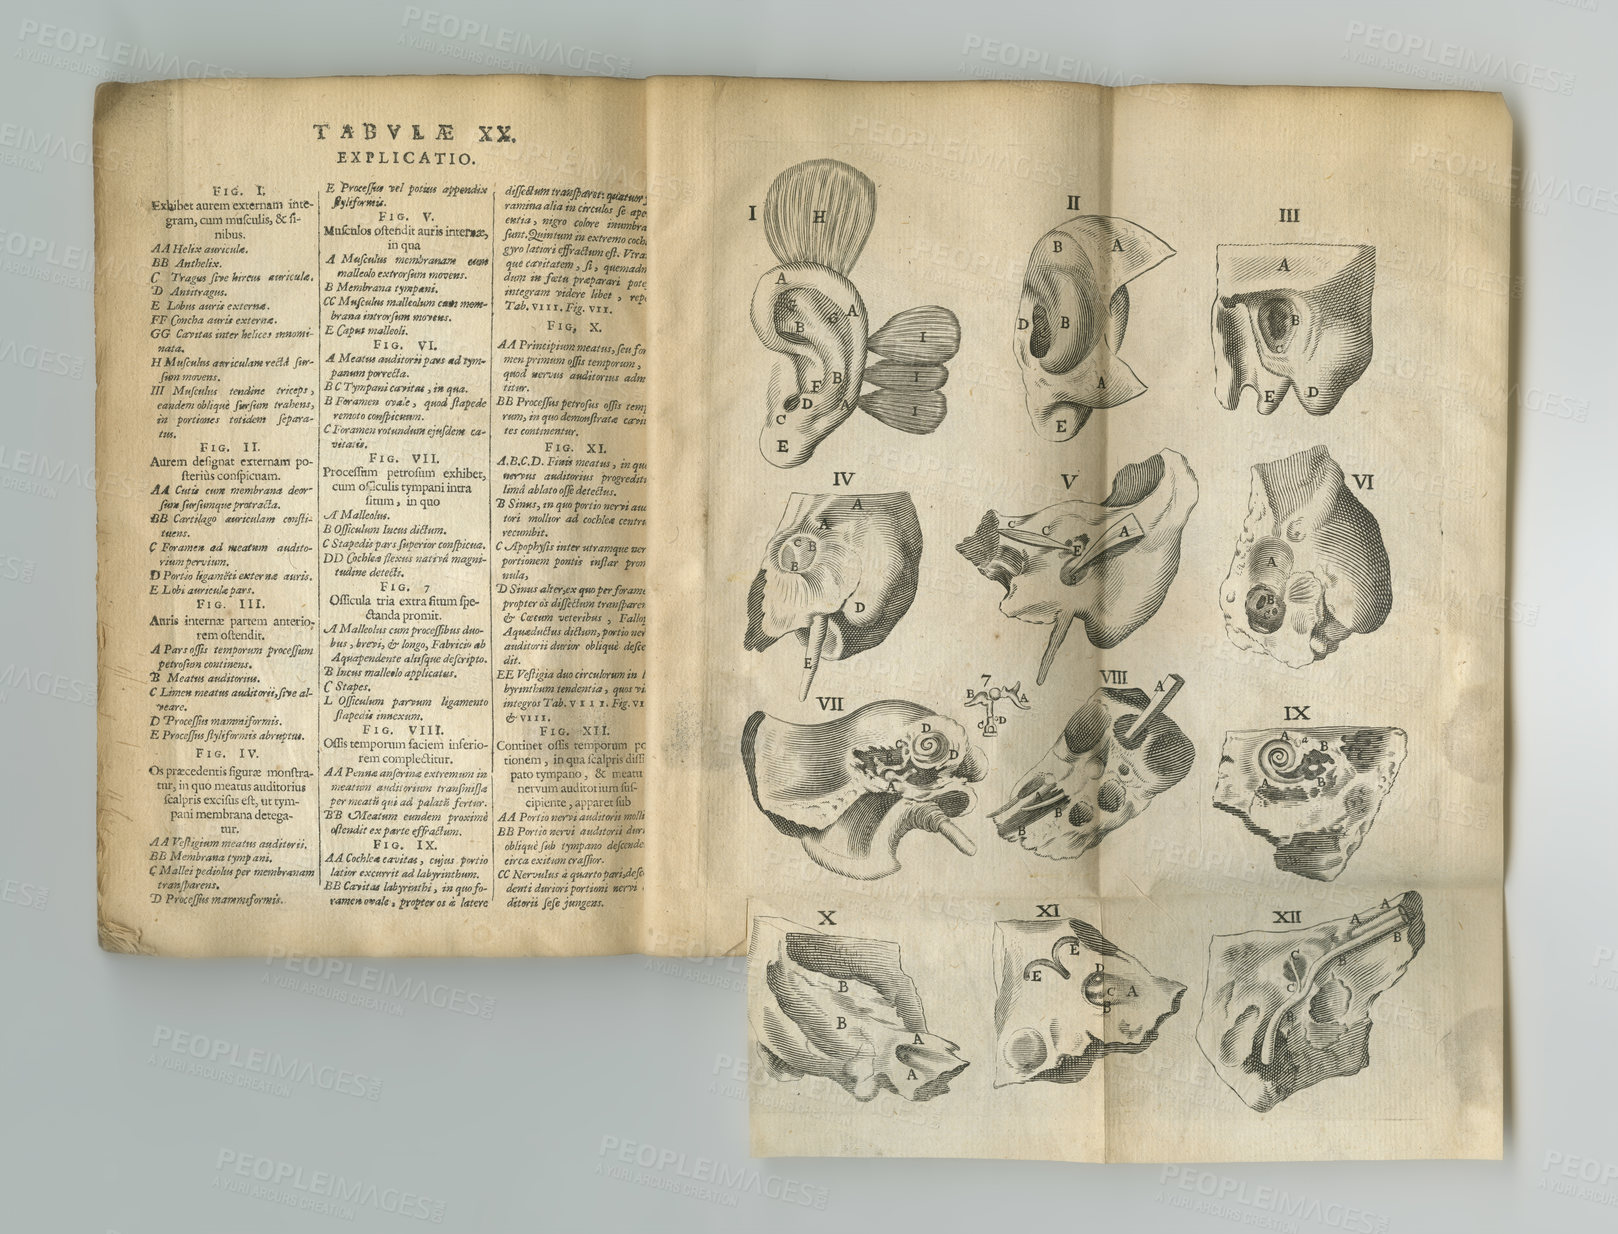 Buy stock photo Old book, vintage and anatomy study of the ear, hearing or body parts in latin literature, manuscript or ancient scripture against a studio background. Historical novel, journal or illustrations